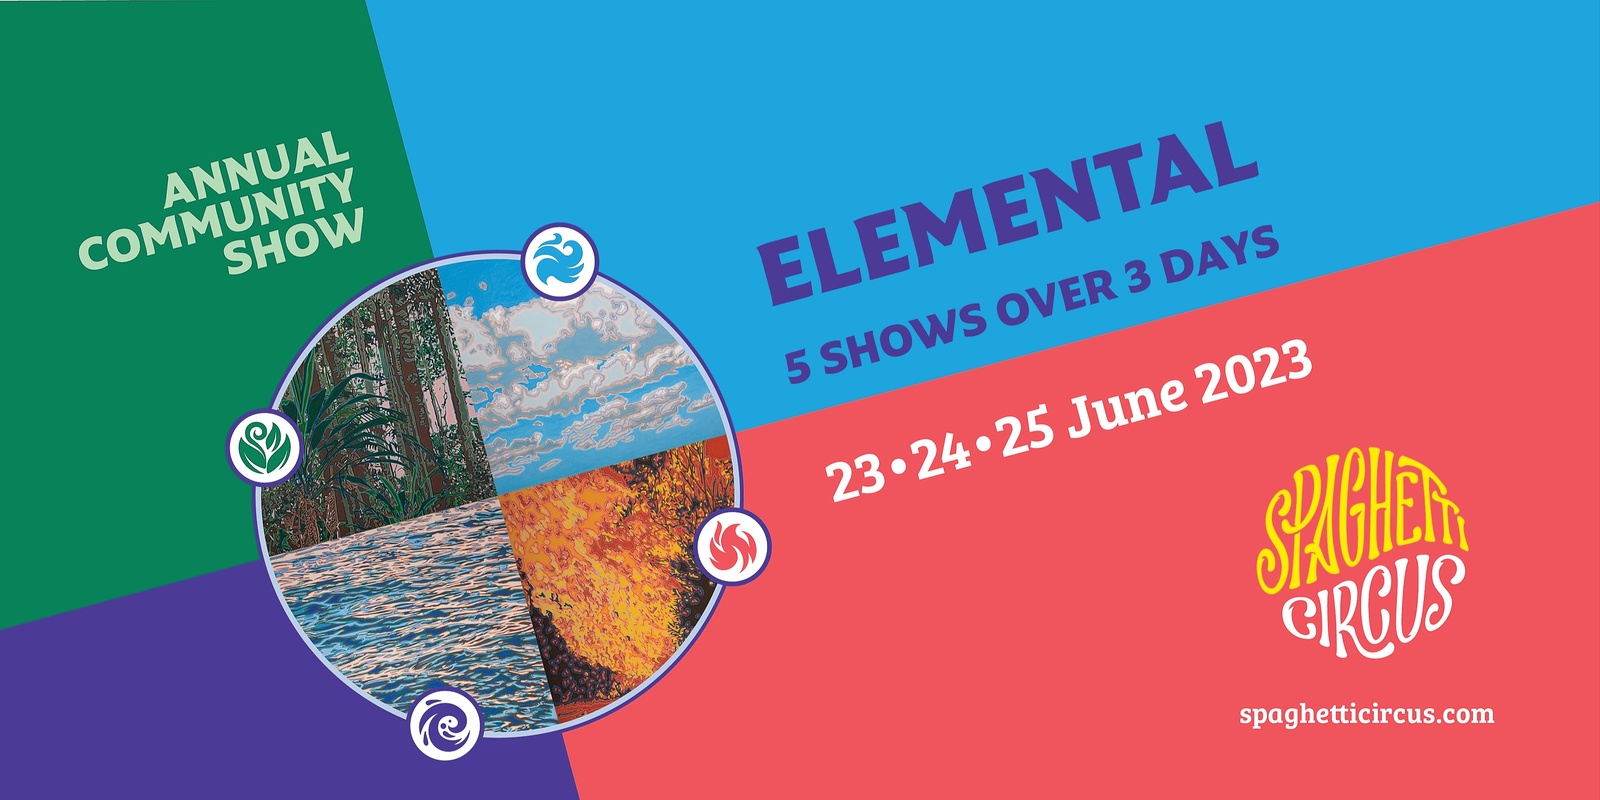 Banner image for 2023 Community Annual Show - Elemental